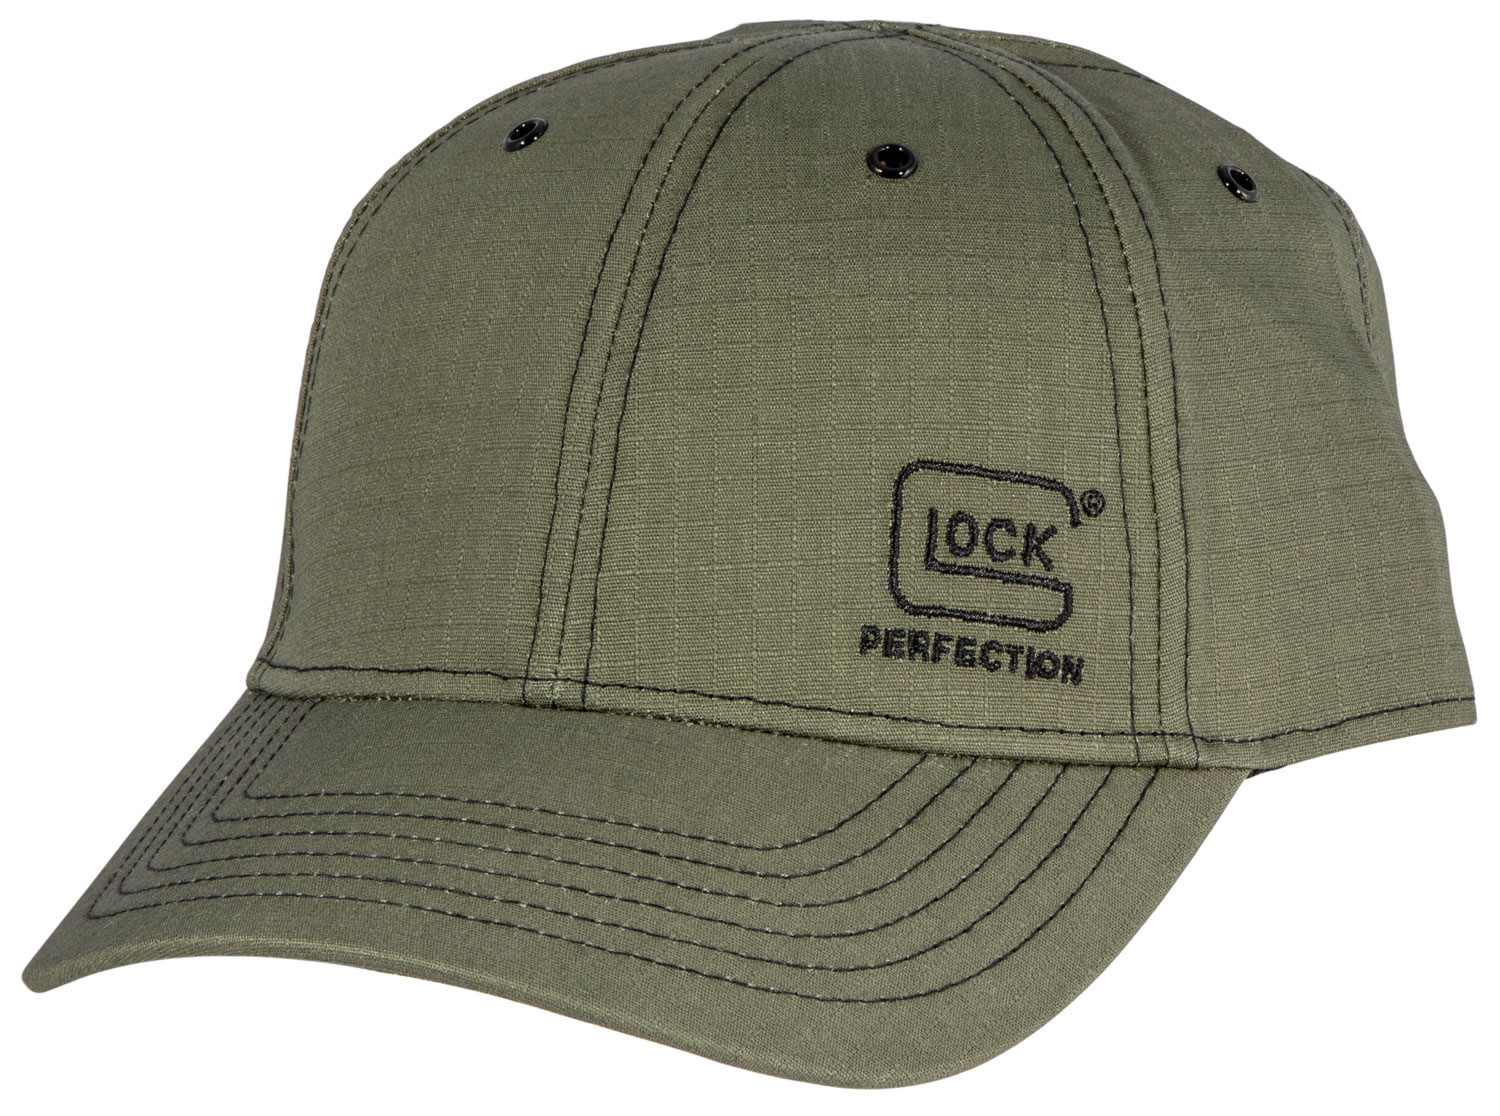 Glock AS10079 1986 Ripstop Olive Hat w/Glock Perfection Logo Adjustable...-img-0